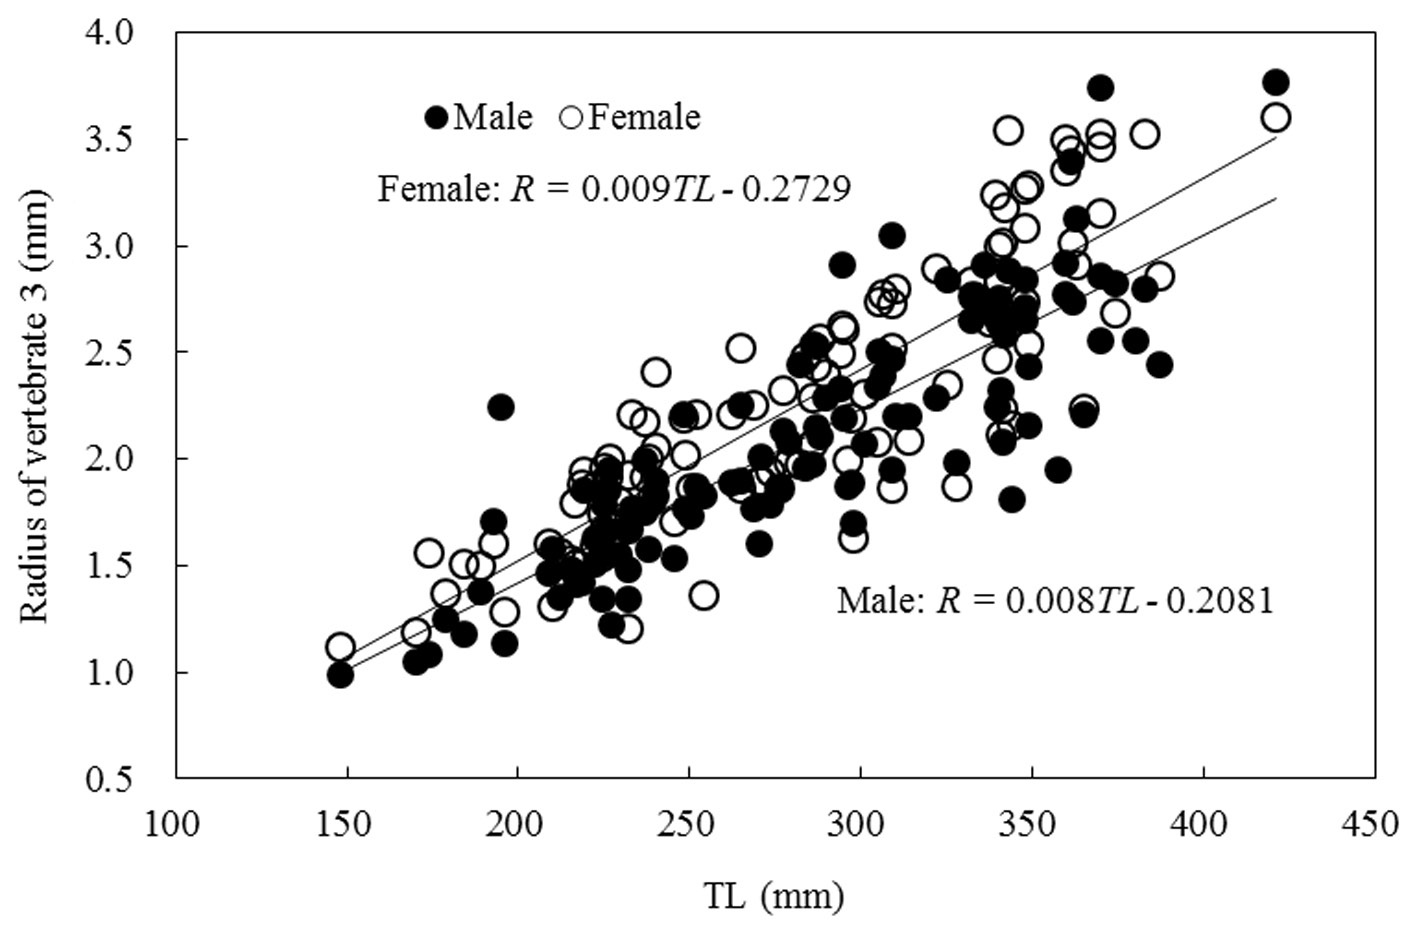 Regression linear of total length (TL) and vertebrae radius of Hemibarbus labeo for male and female.